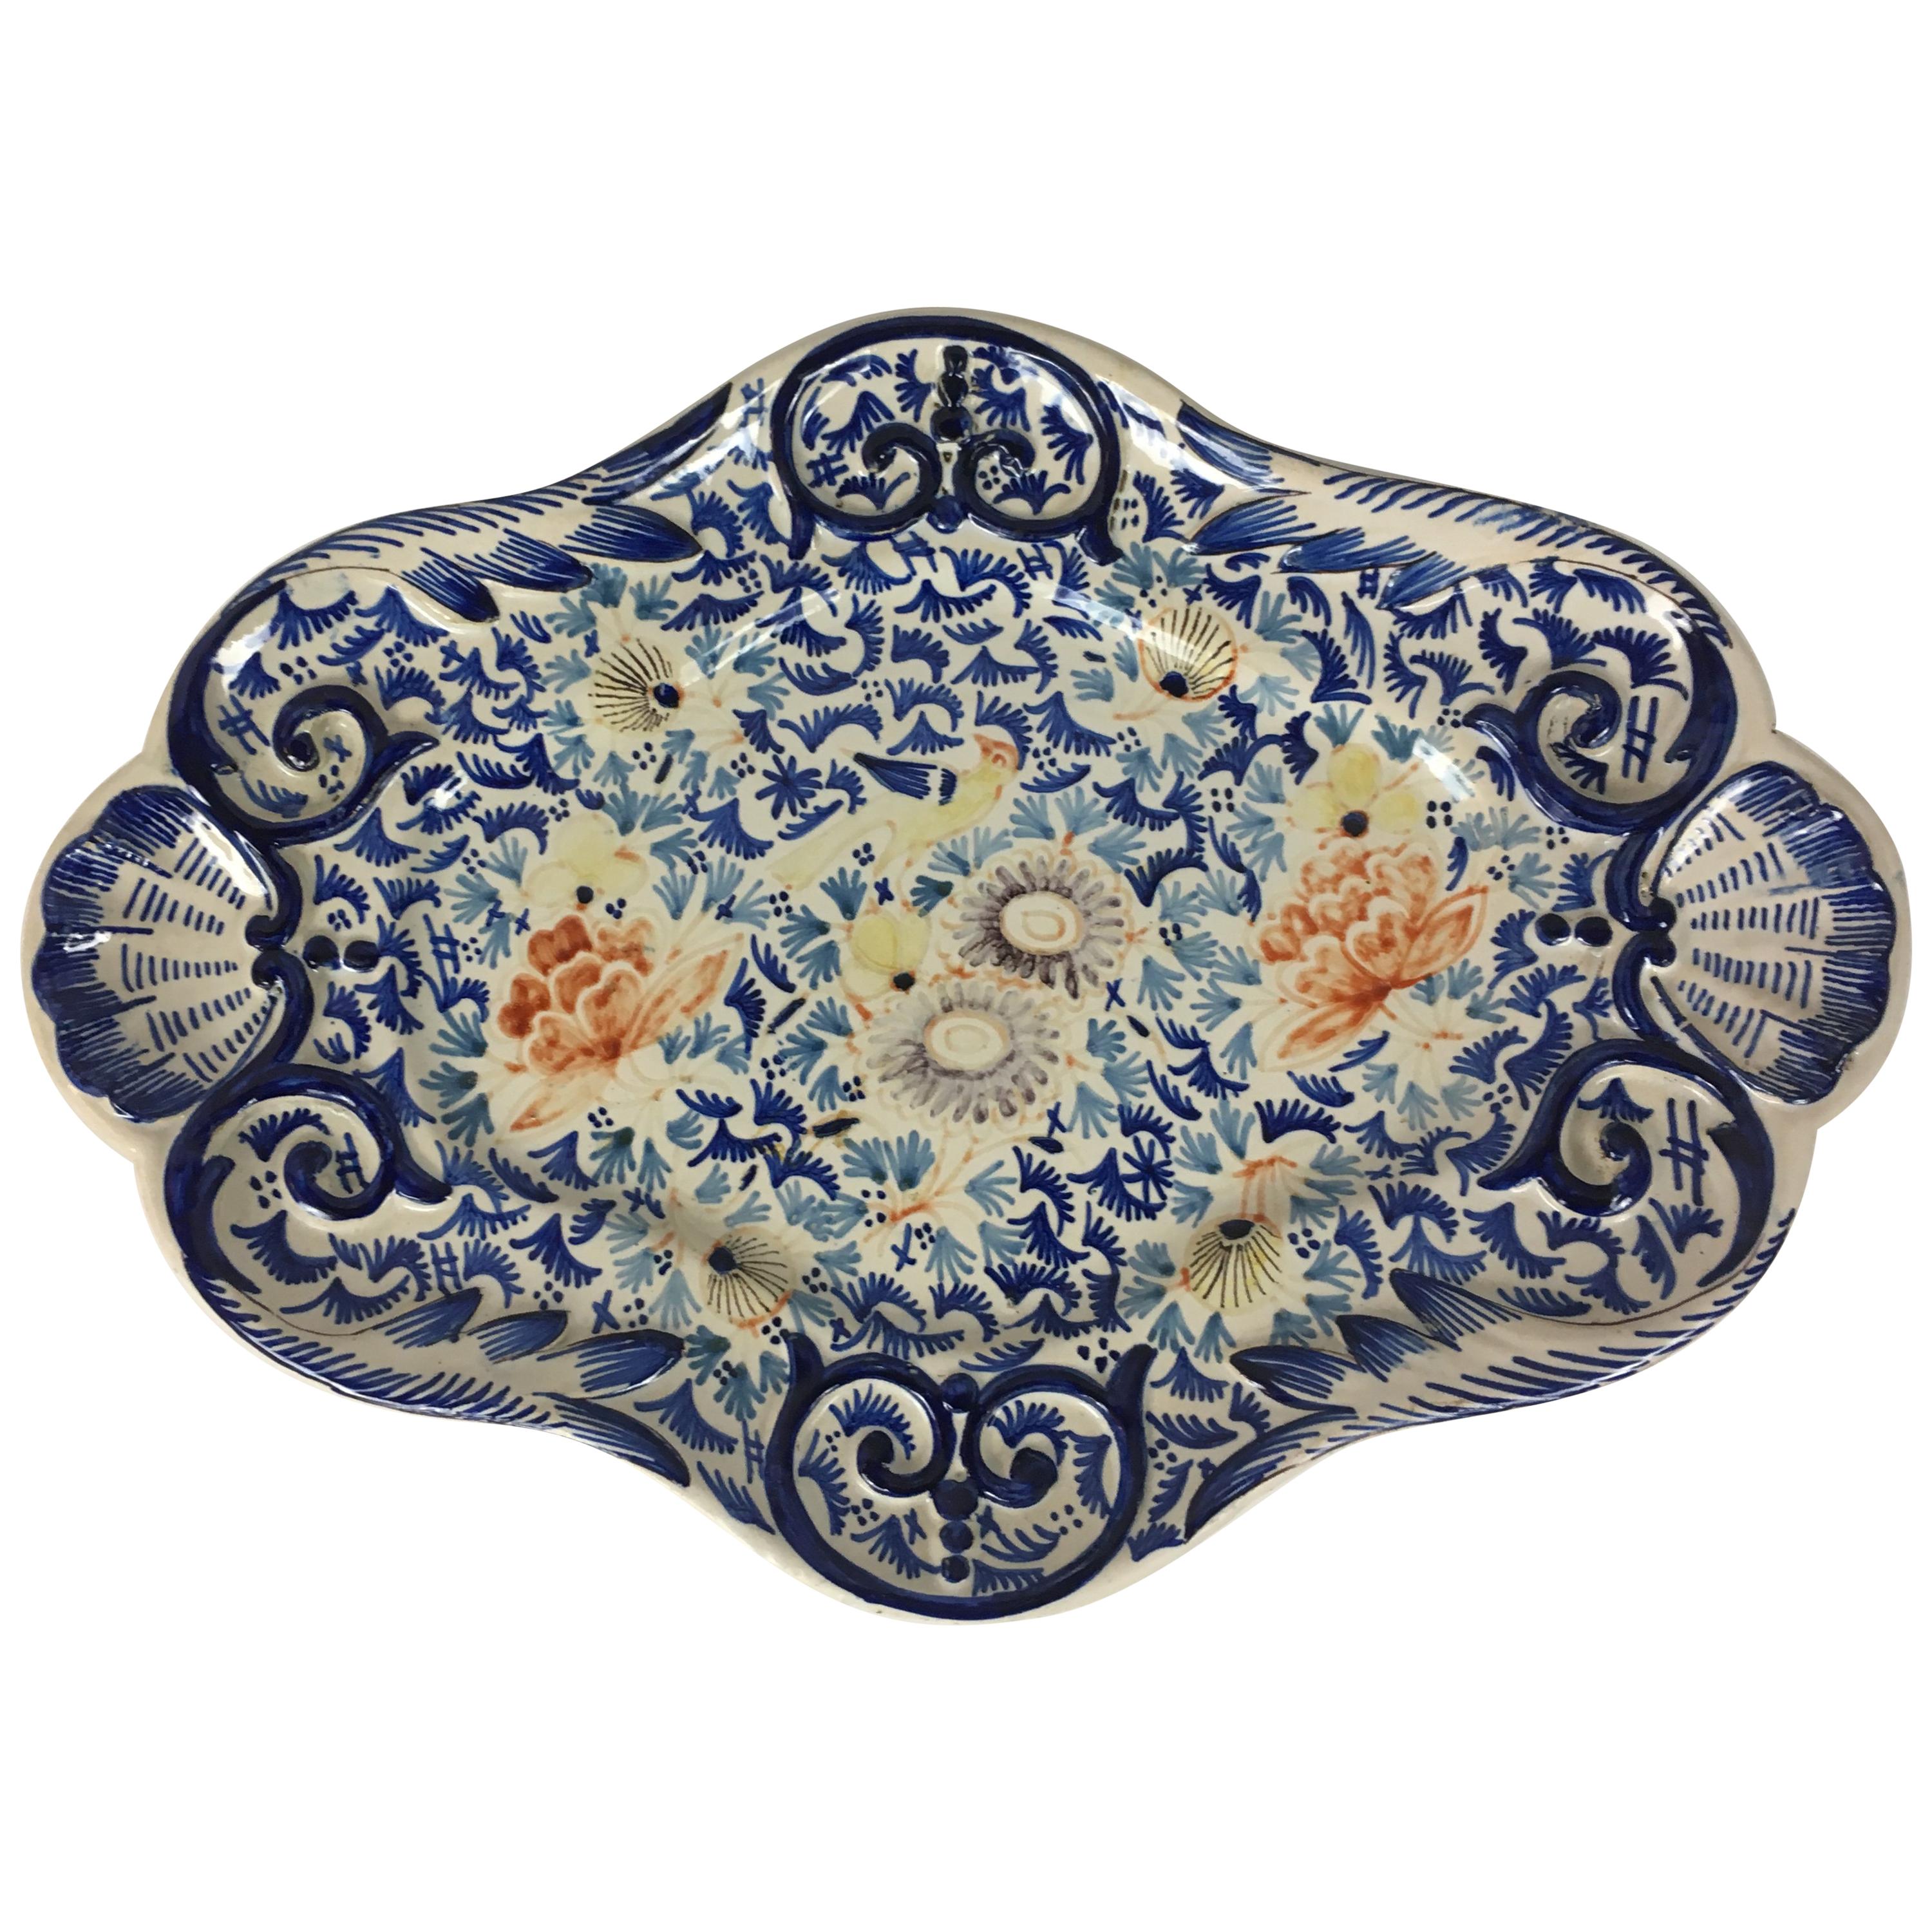 19th Century Earthenware Platter from Roeun France